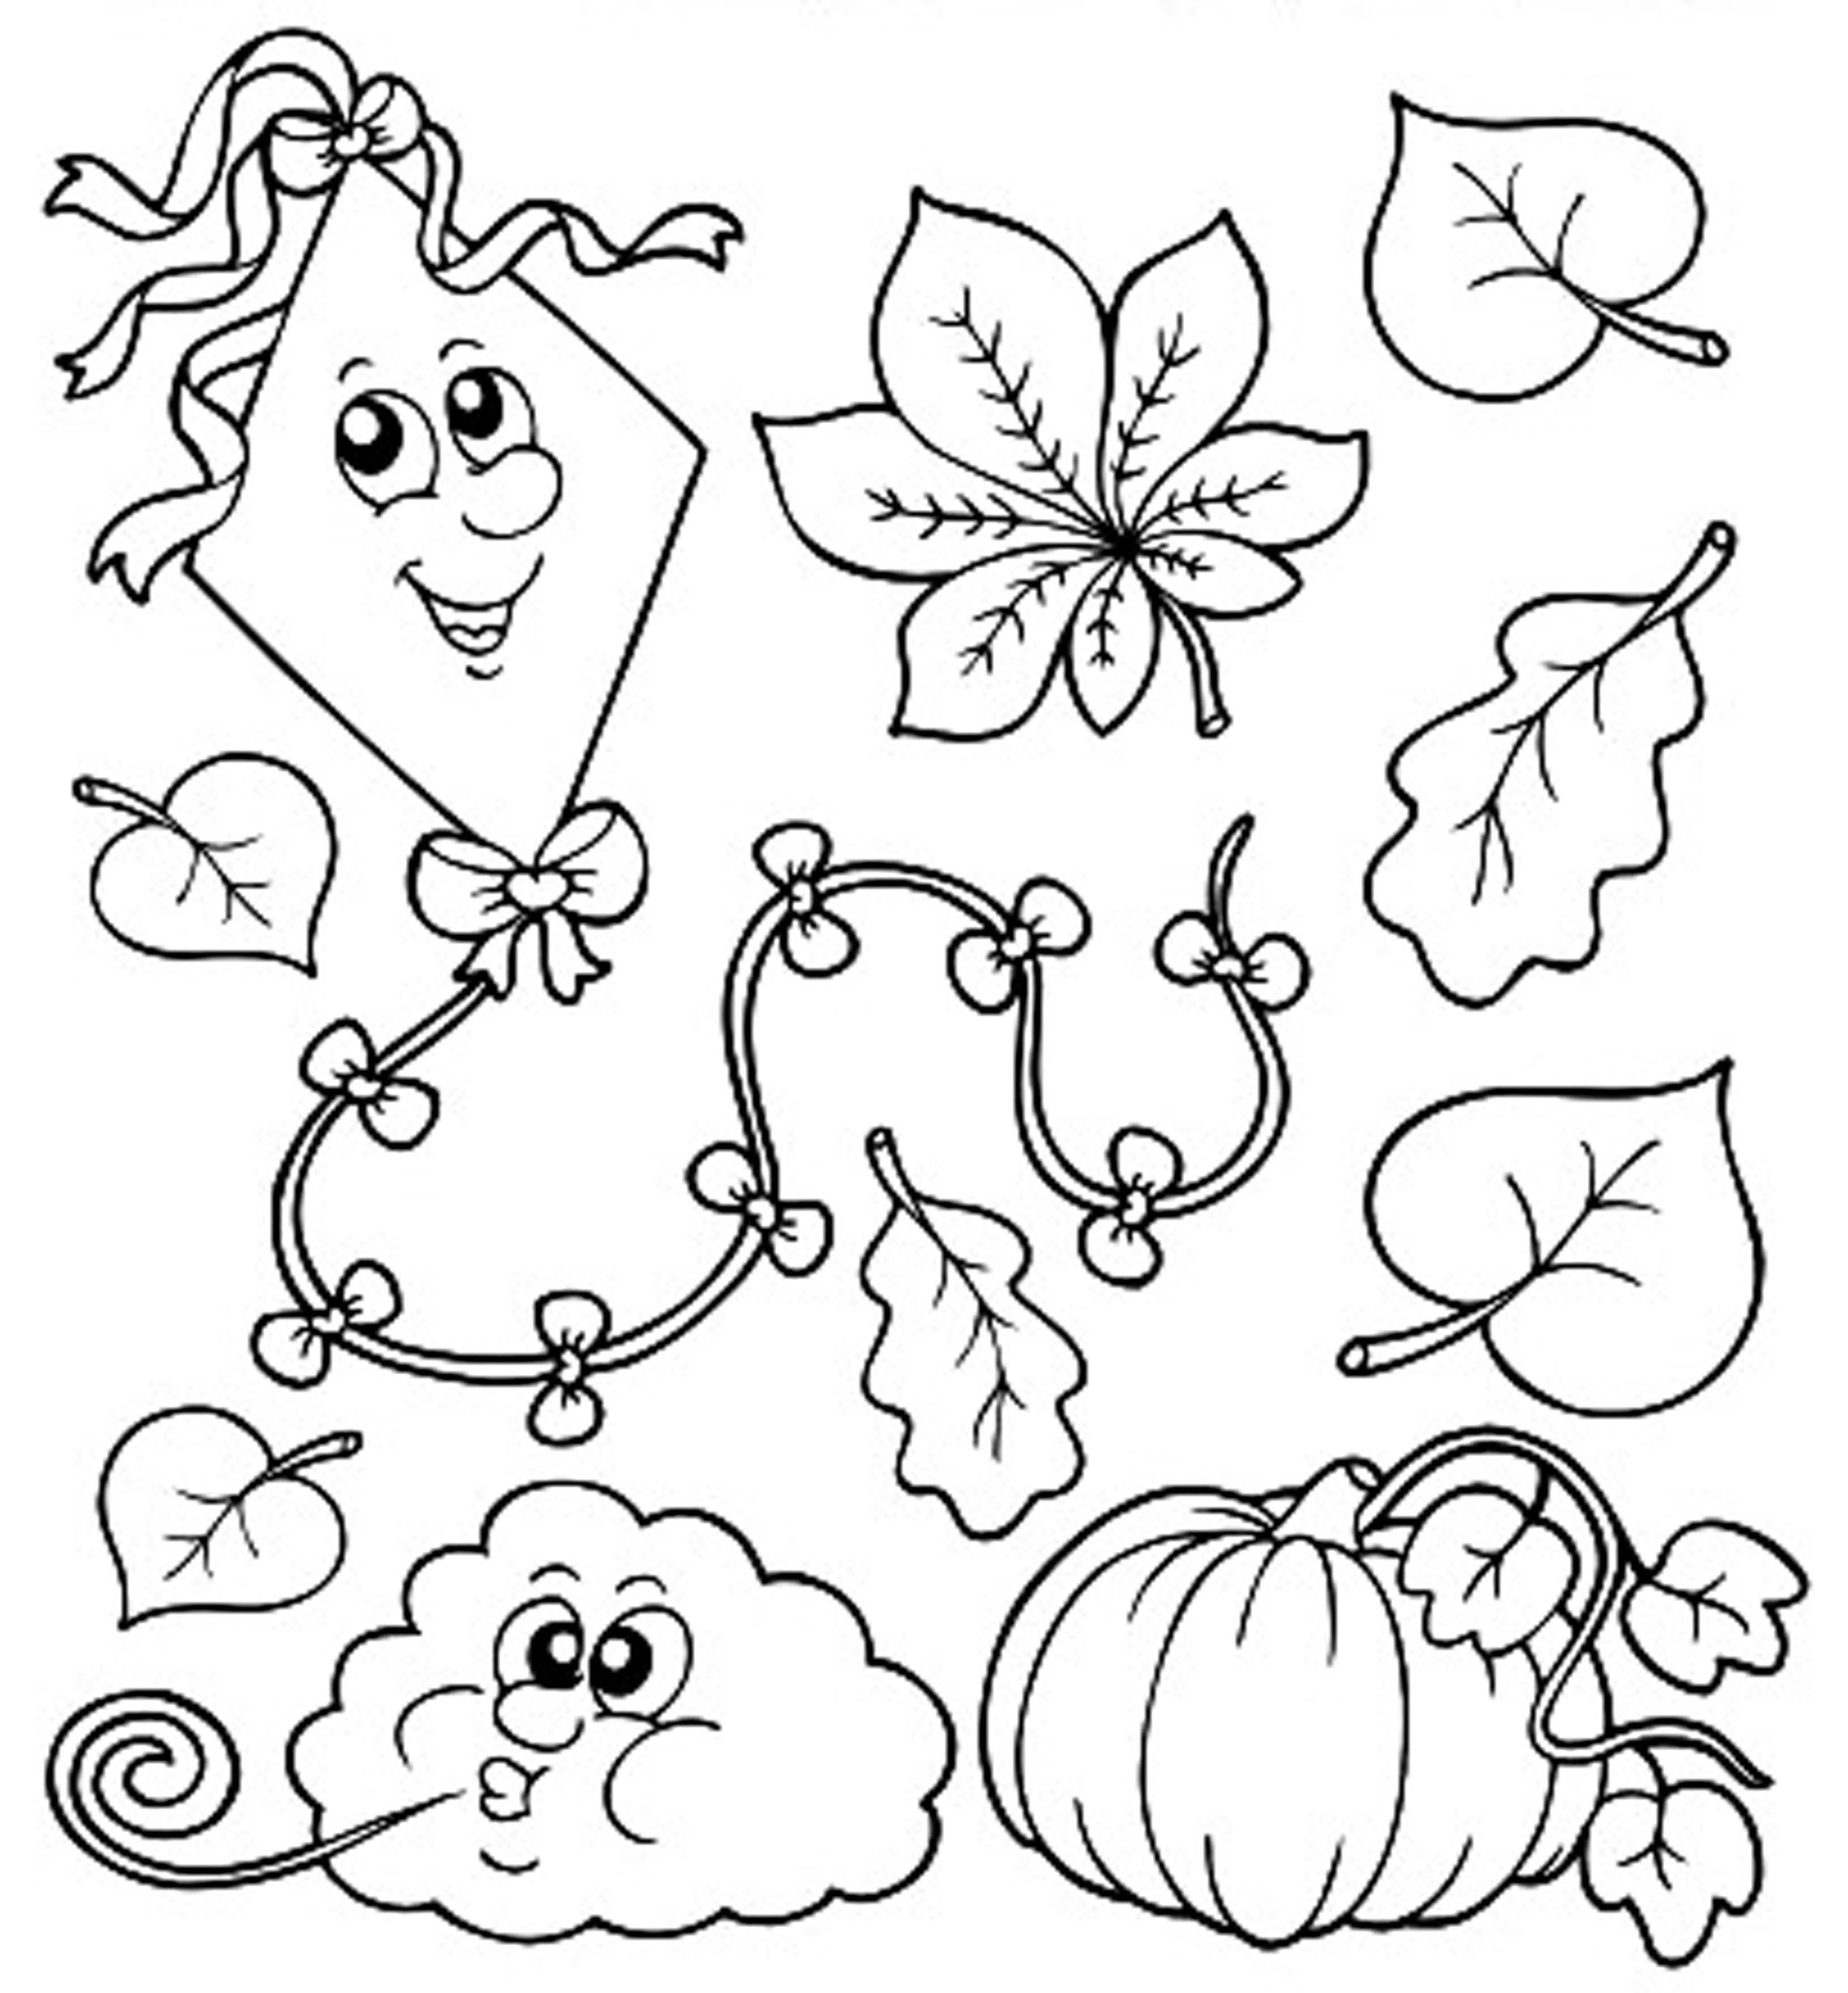 Autumn Coloring Pages For Kids at GetColorings.com | Free ...